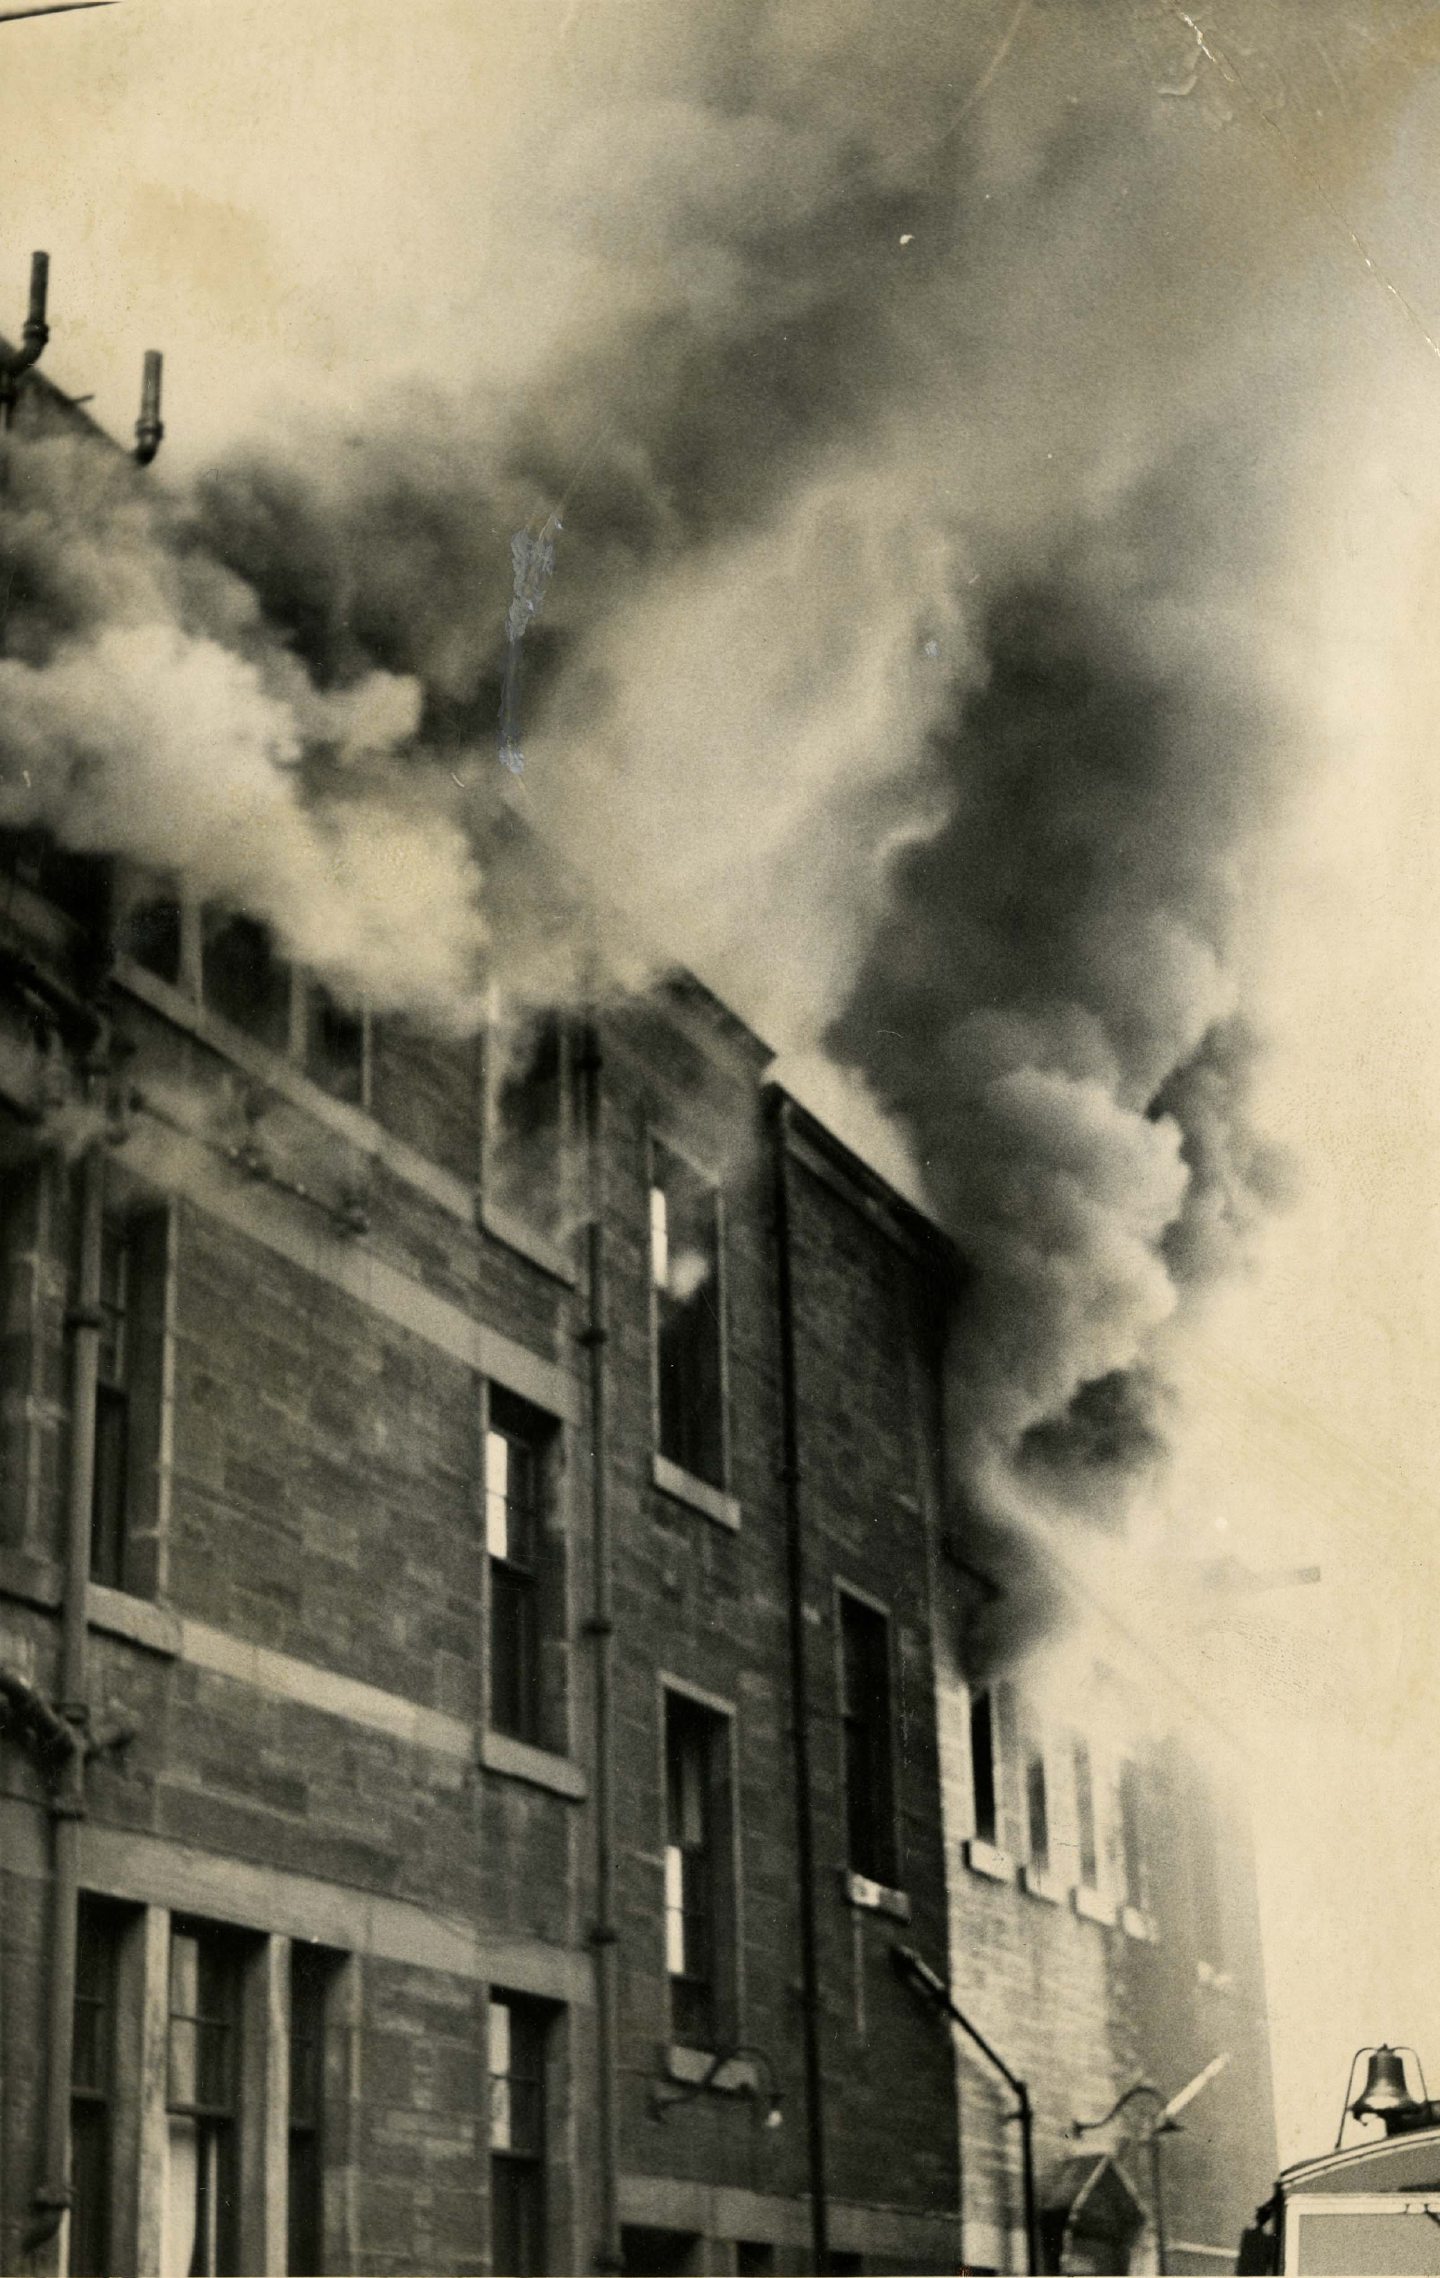 Smoke pours from the building as The Rep is engulfed by flames in 1963.